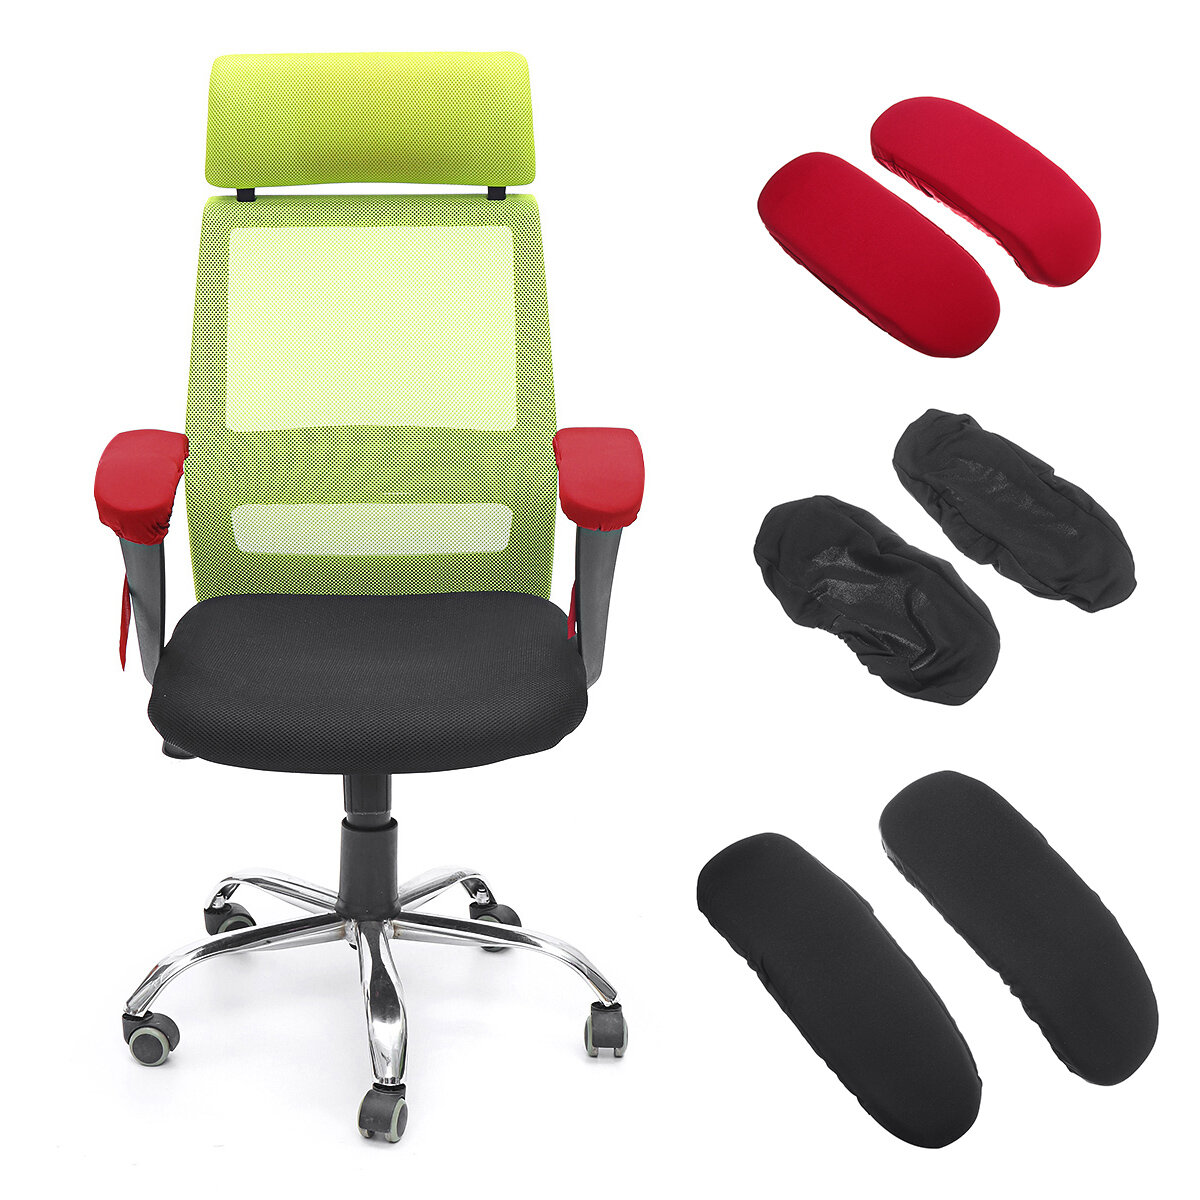 

2 Pcs/pair Chair Armrest Pad Office Chair Memory Foam Sponge Cushion Comfy Arm Rest Cover Elbows Support Slipcover